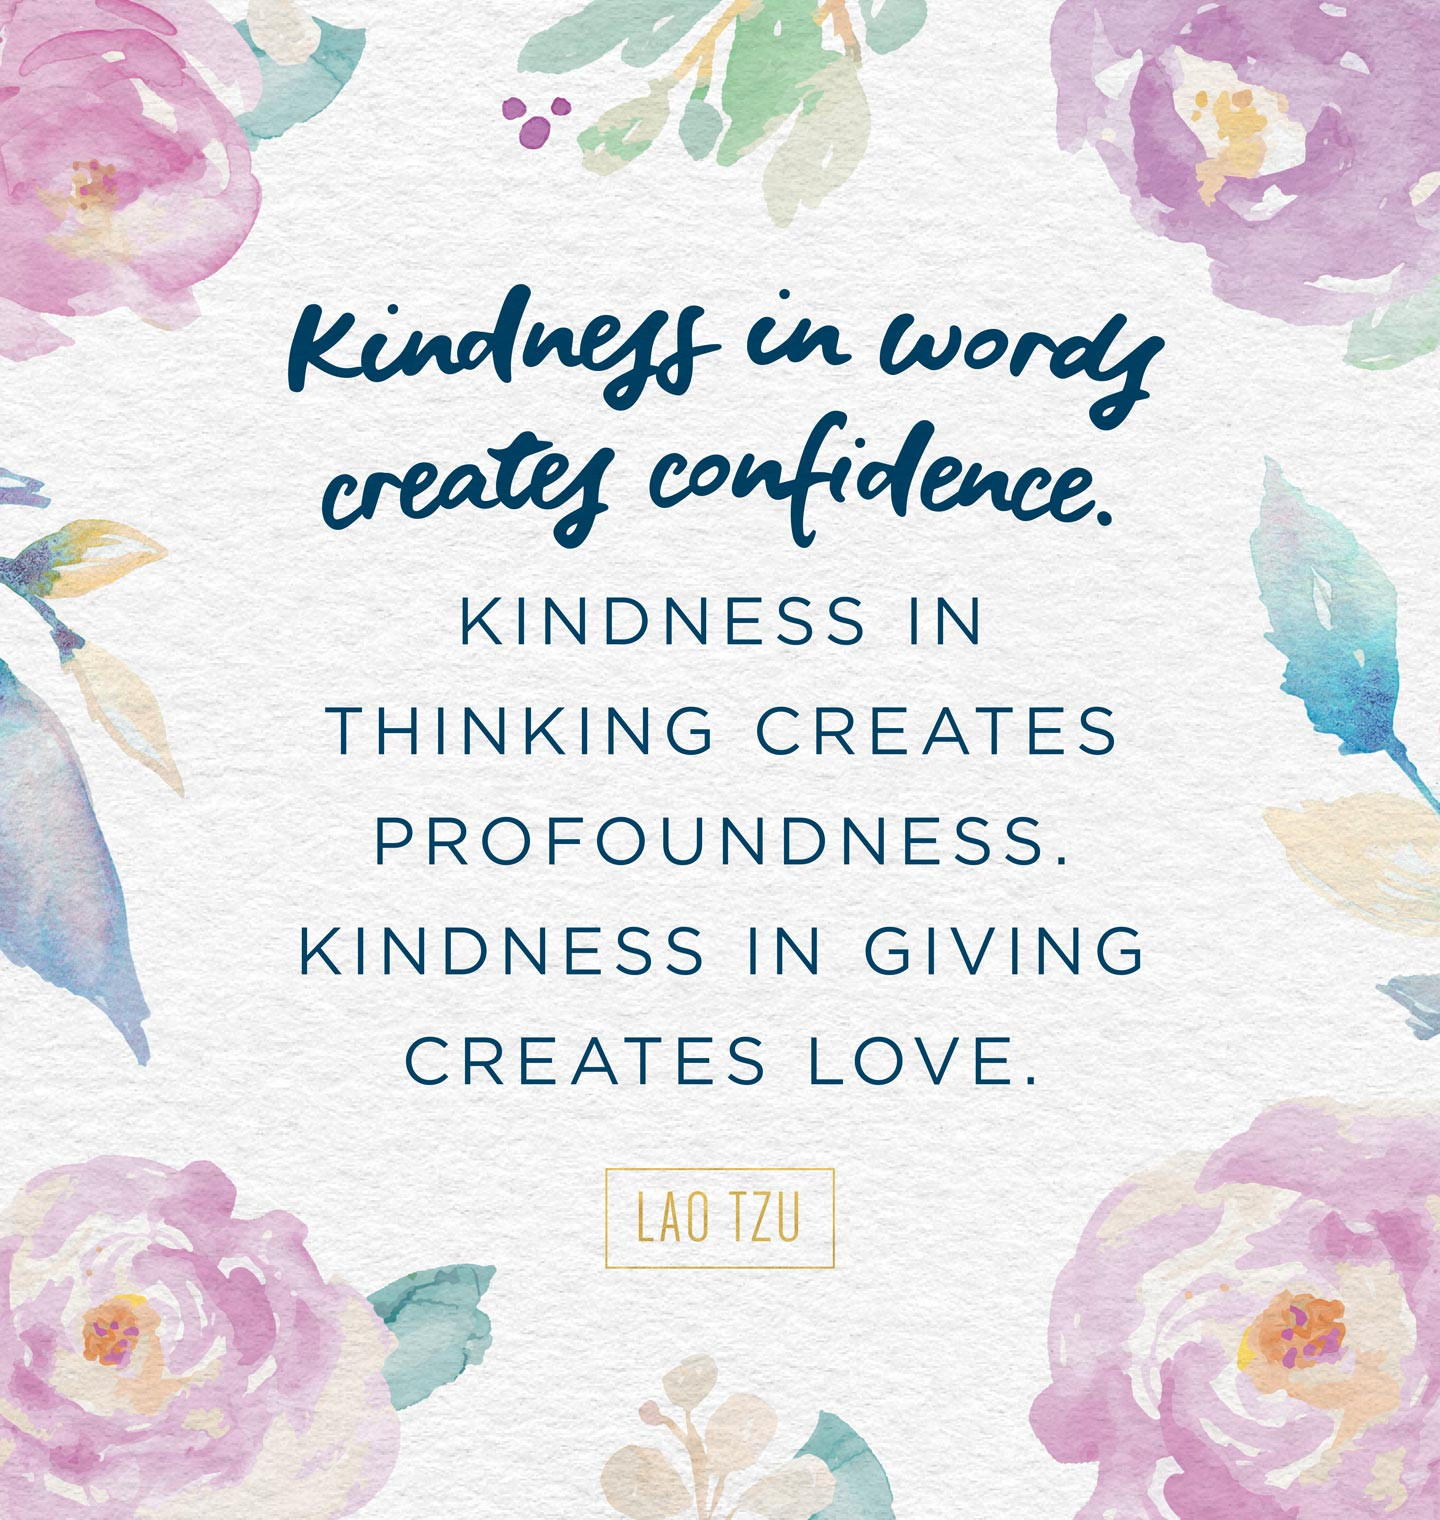 Quotes On Kindness
 30 Inspiring Kindness Quotes That Will Enlighten You FTD